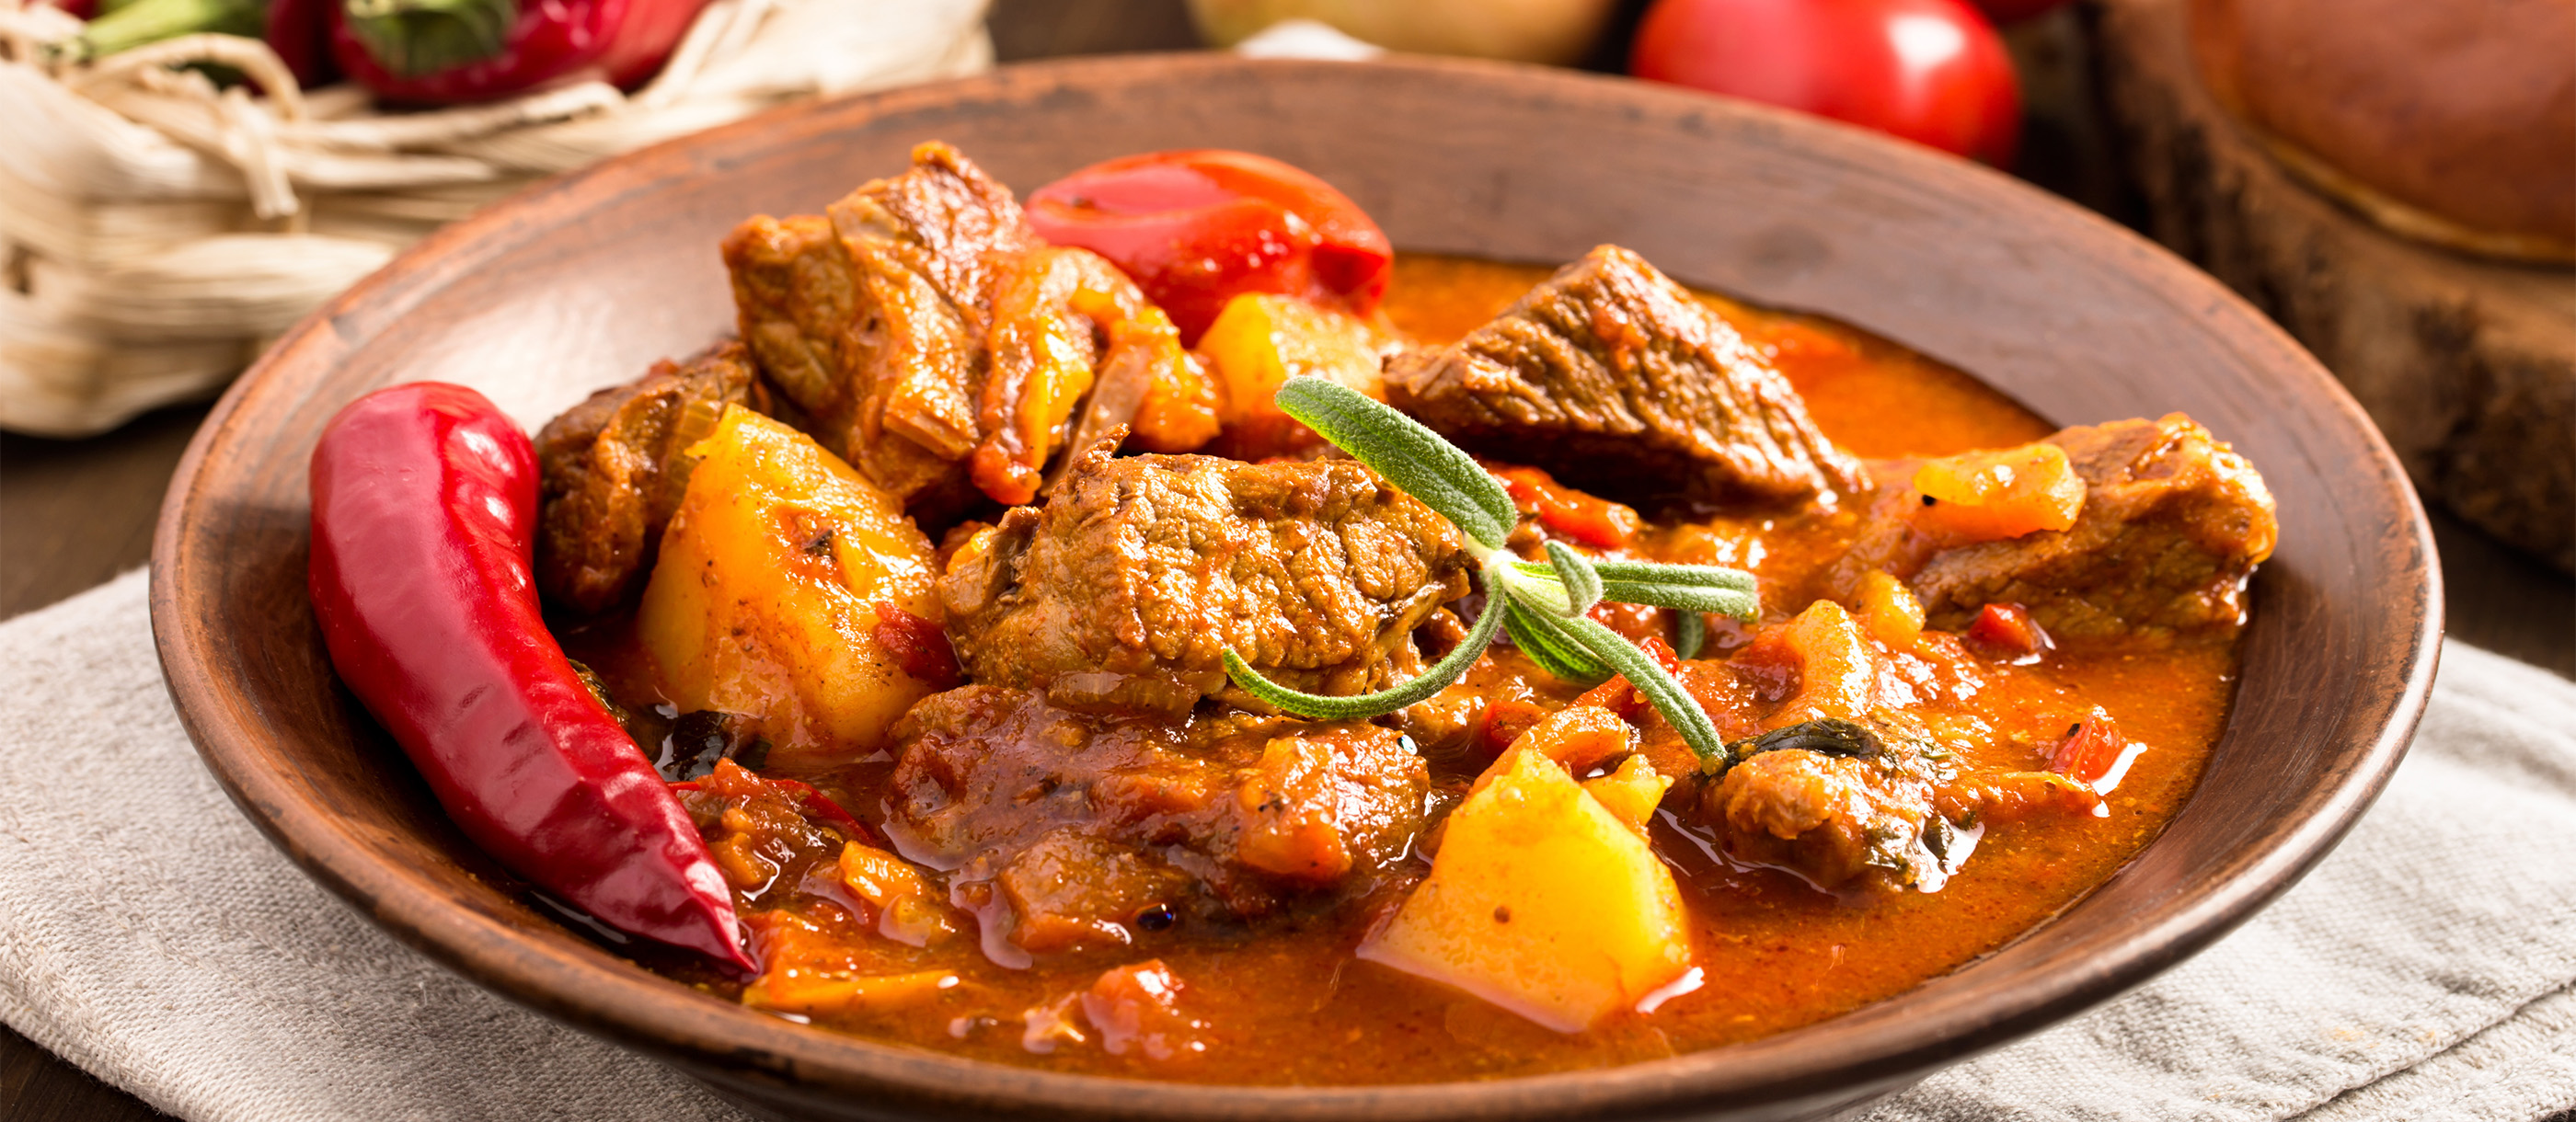 Carne Guisada | Traditional Stew From Dominican Republic, Caribbean